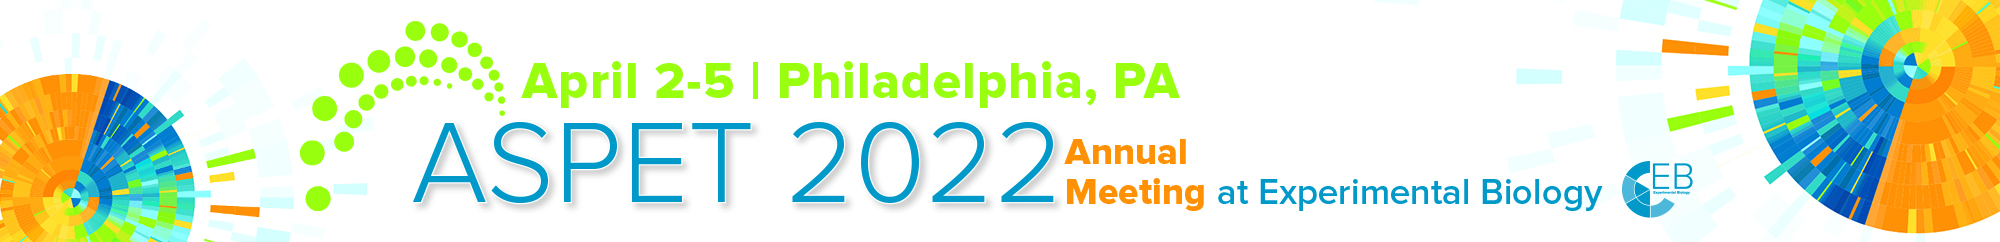 ASPET 2022 Annual Meeting at Experimental Biology